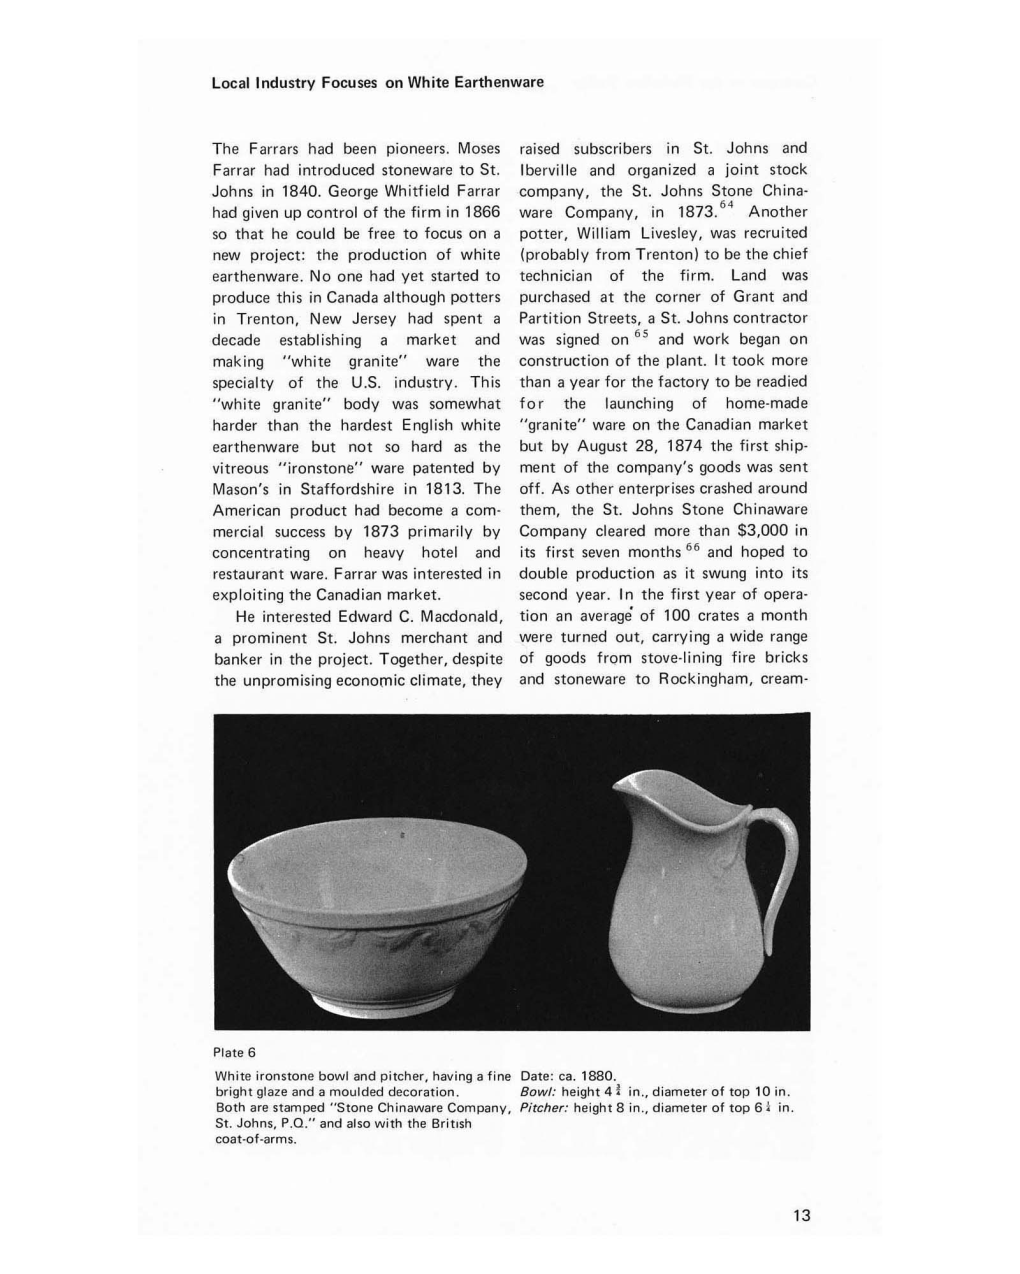 Local Lndustry Focuses on White Earthenware the Farrars Had Been